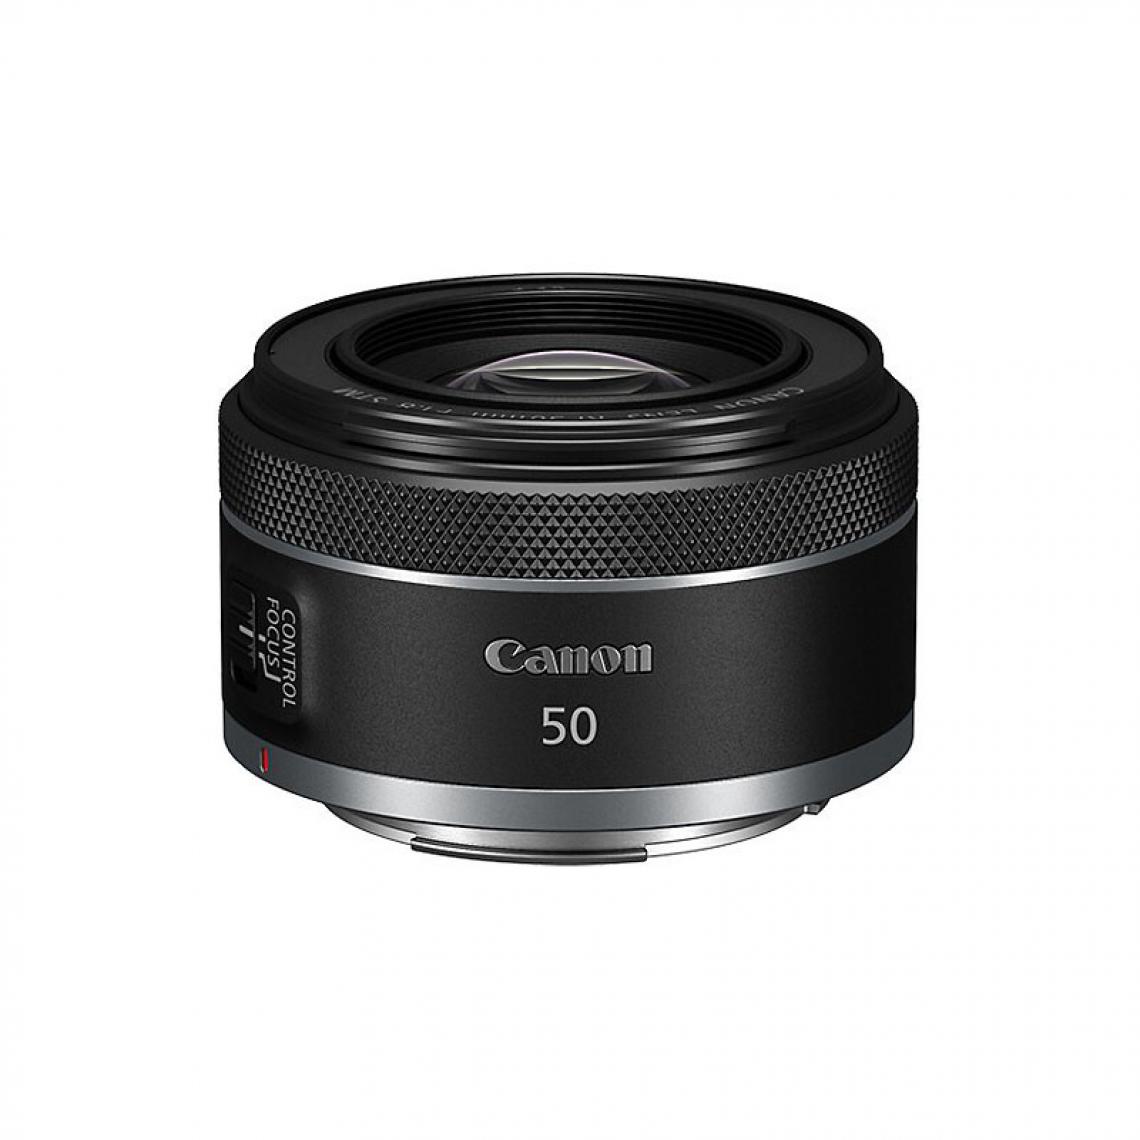 Canon - CANON Objectif RF 50mm f/1.8 STM - Objectif Photo